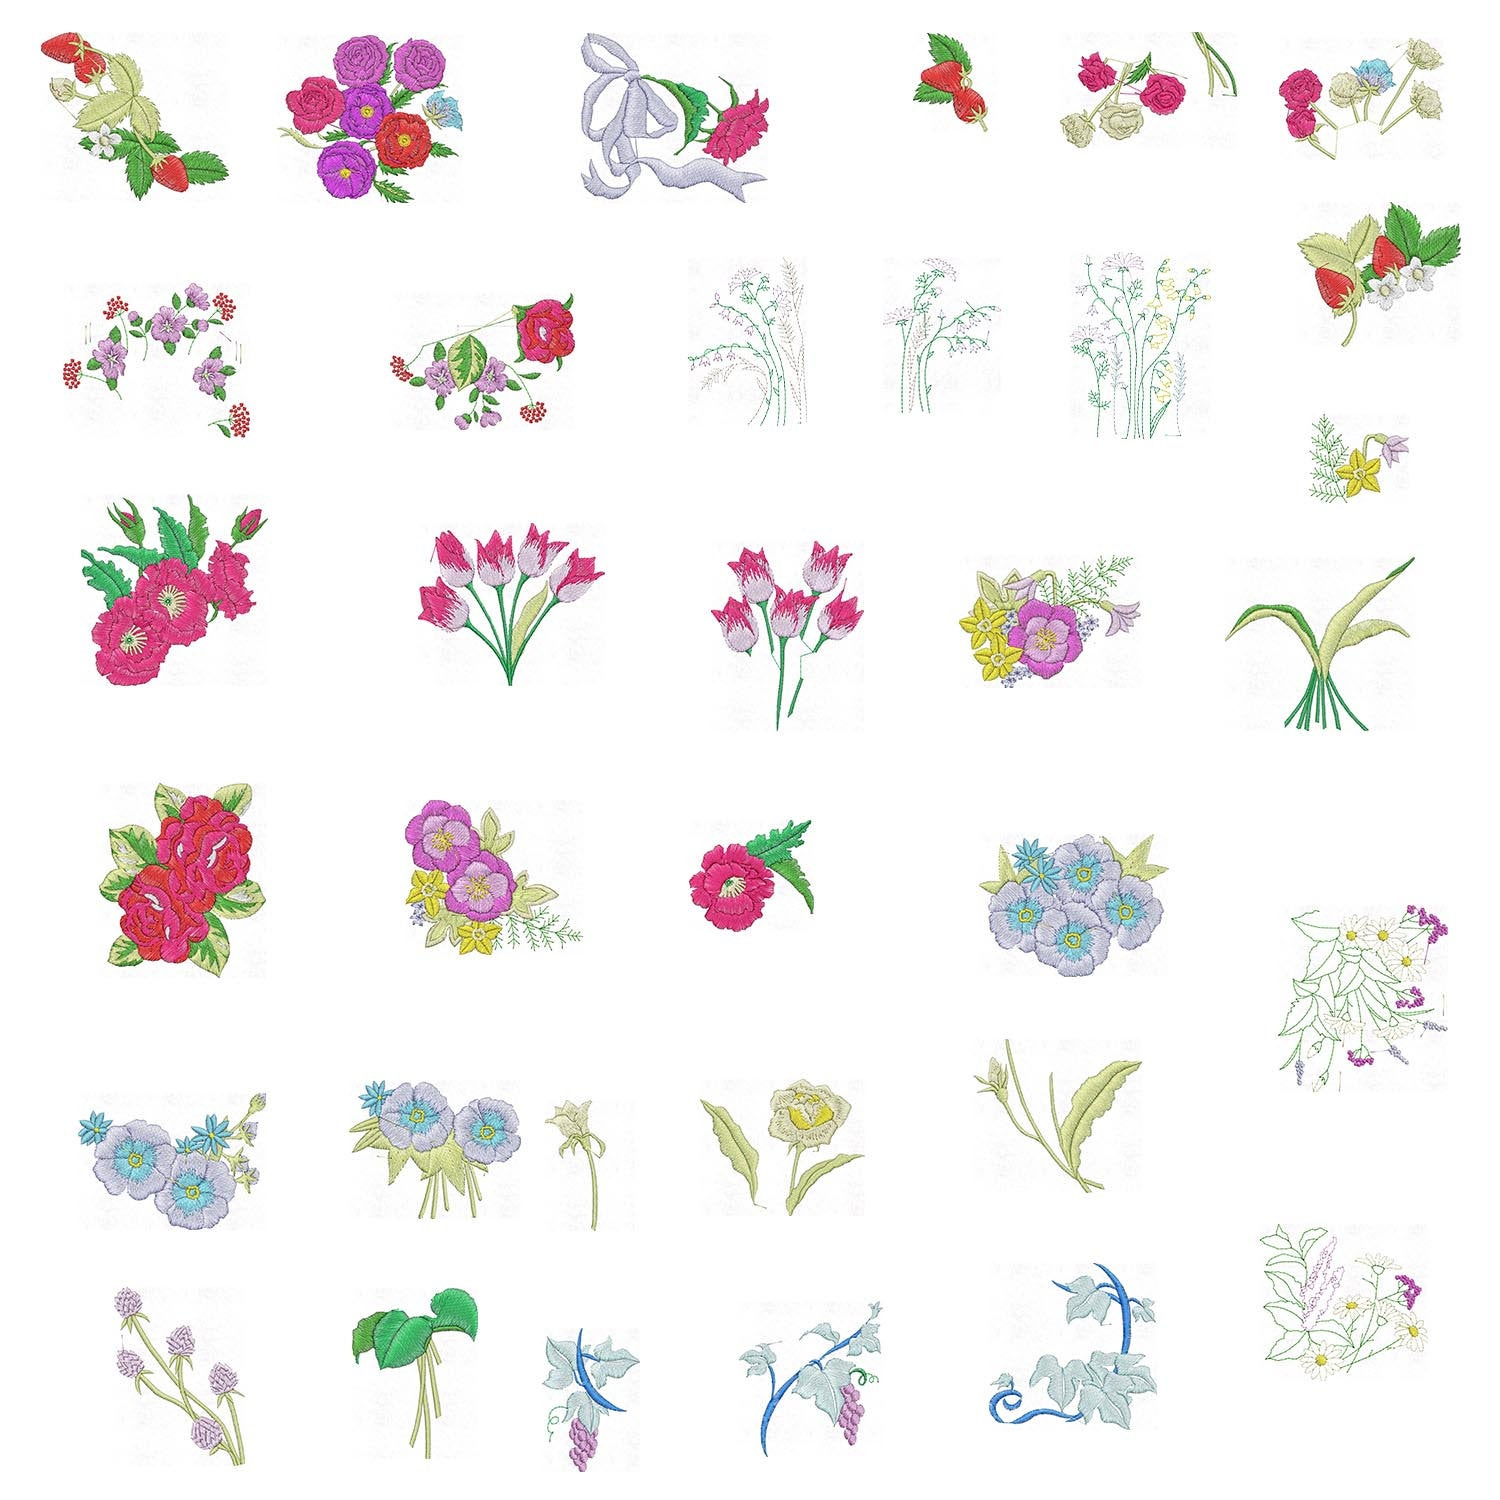 Embroidery Machine Patterns Large Floral Patterns Memory Card Design Embroidery Machine Instant Download